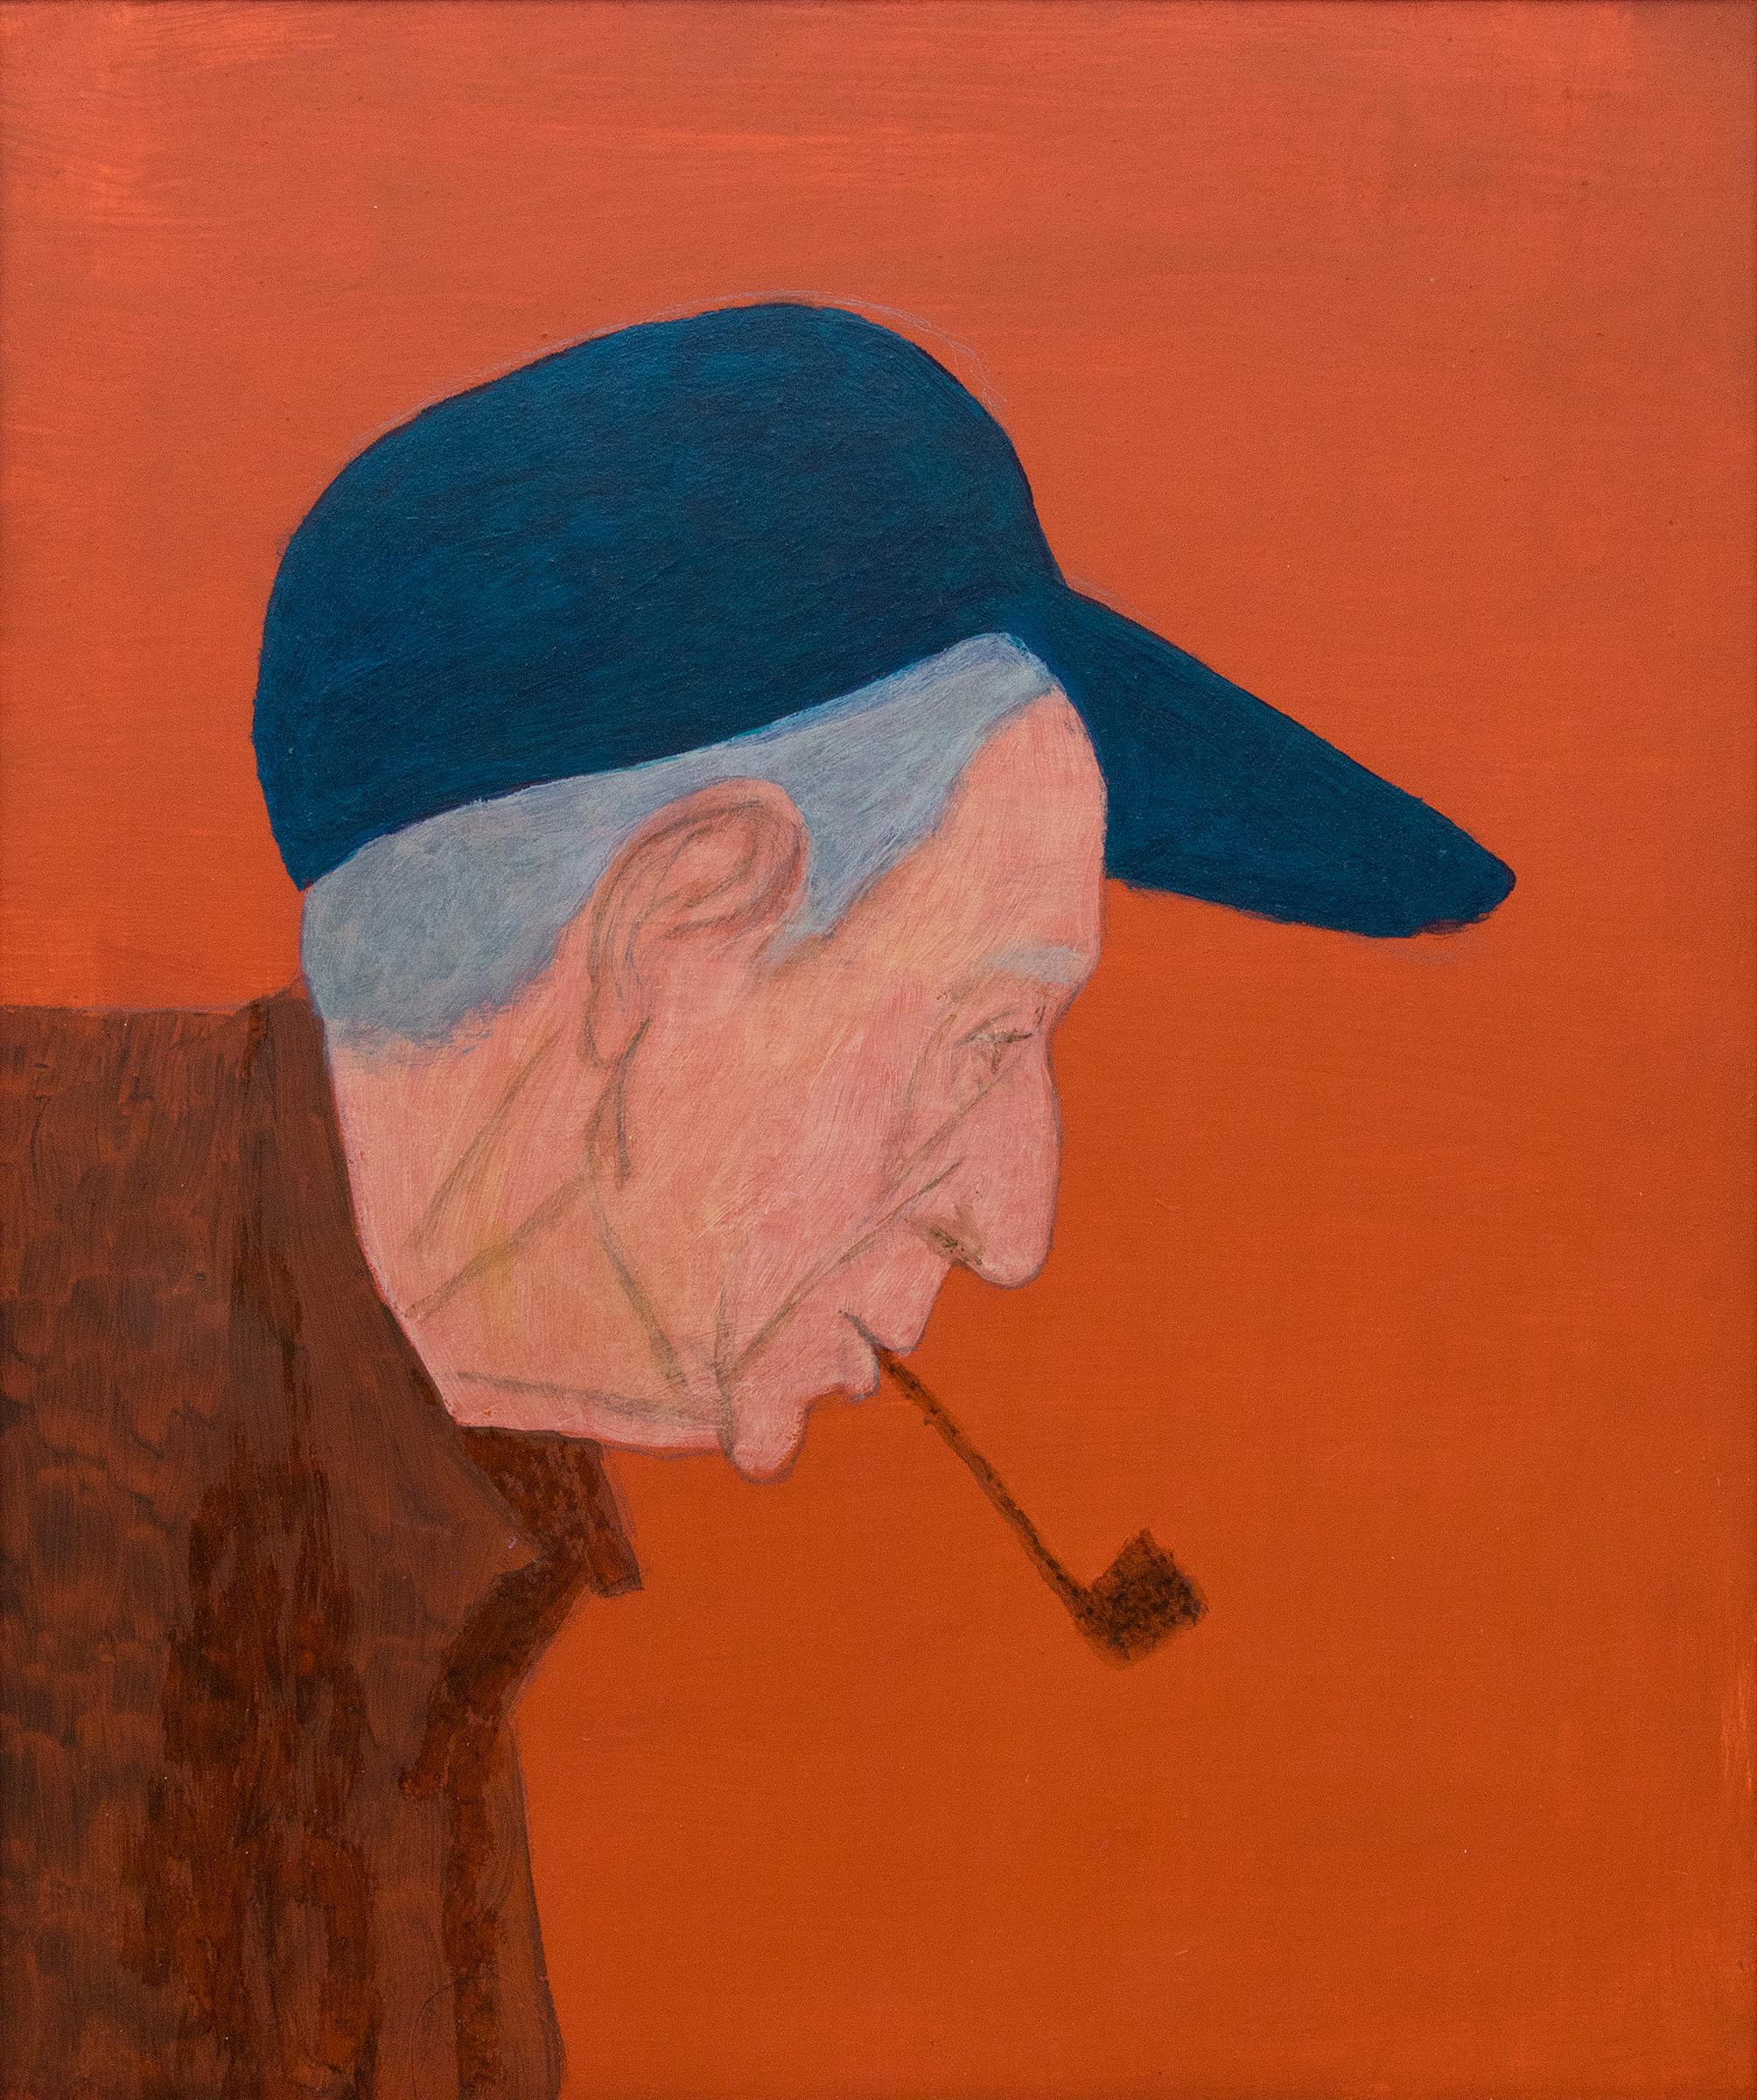 Portrait of a Man in Profile Smoking a Pipe, Orange, Blue, Brown, Gray - American Modern Painting by Margo Hoff